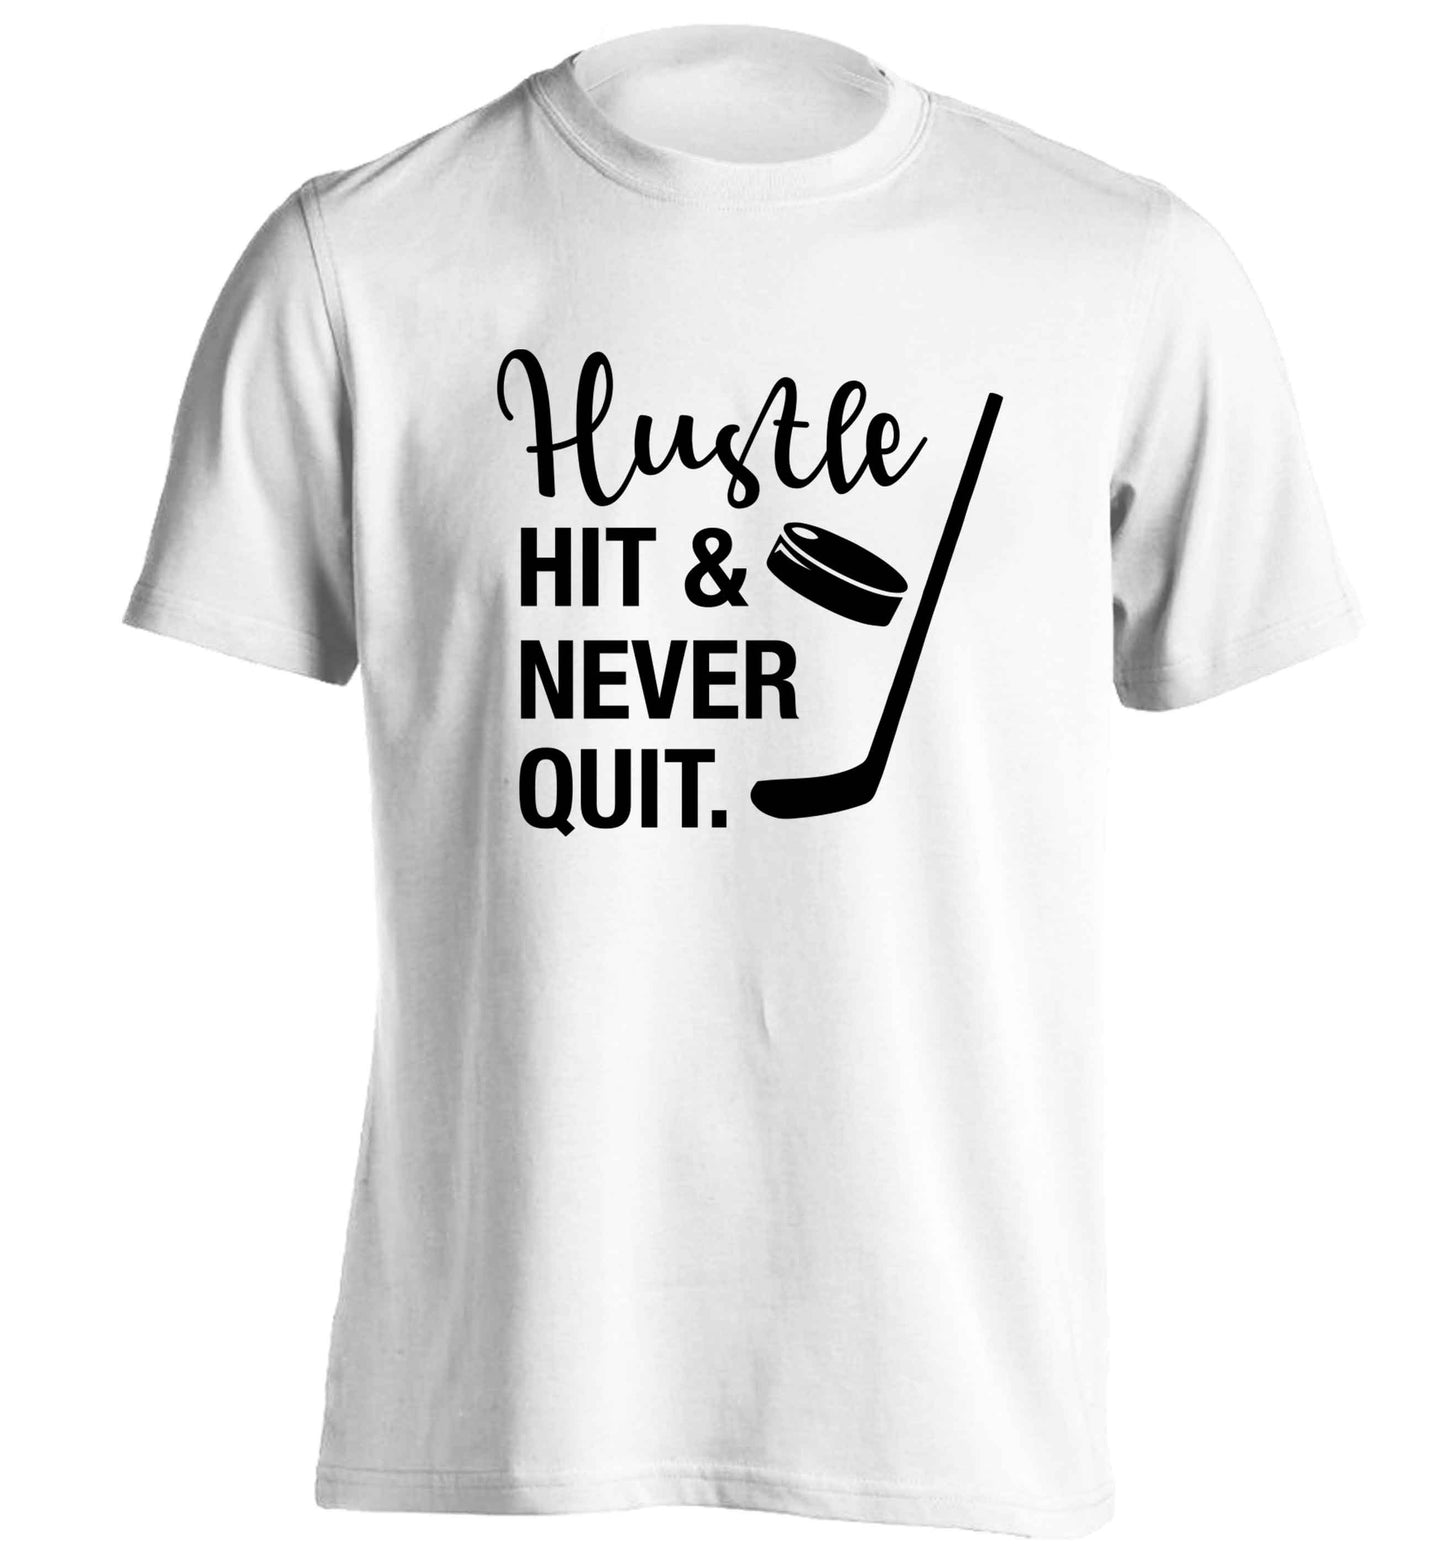 Hustle hit and never quit adults unisex white Tshirt 2XL